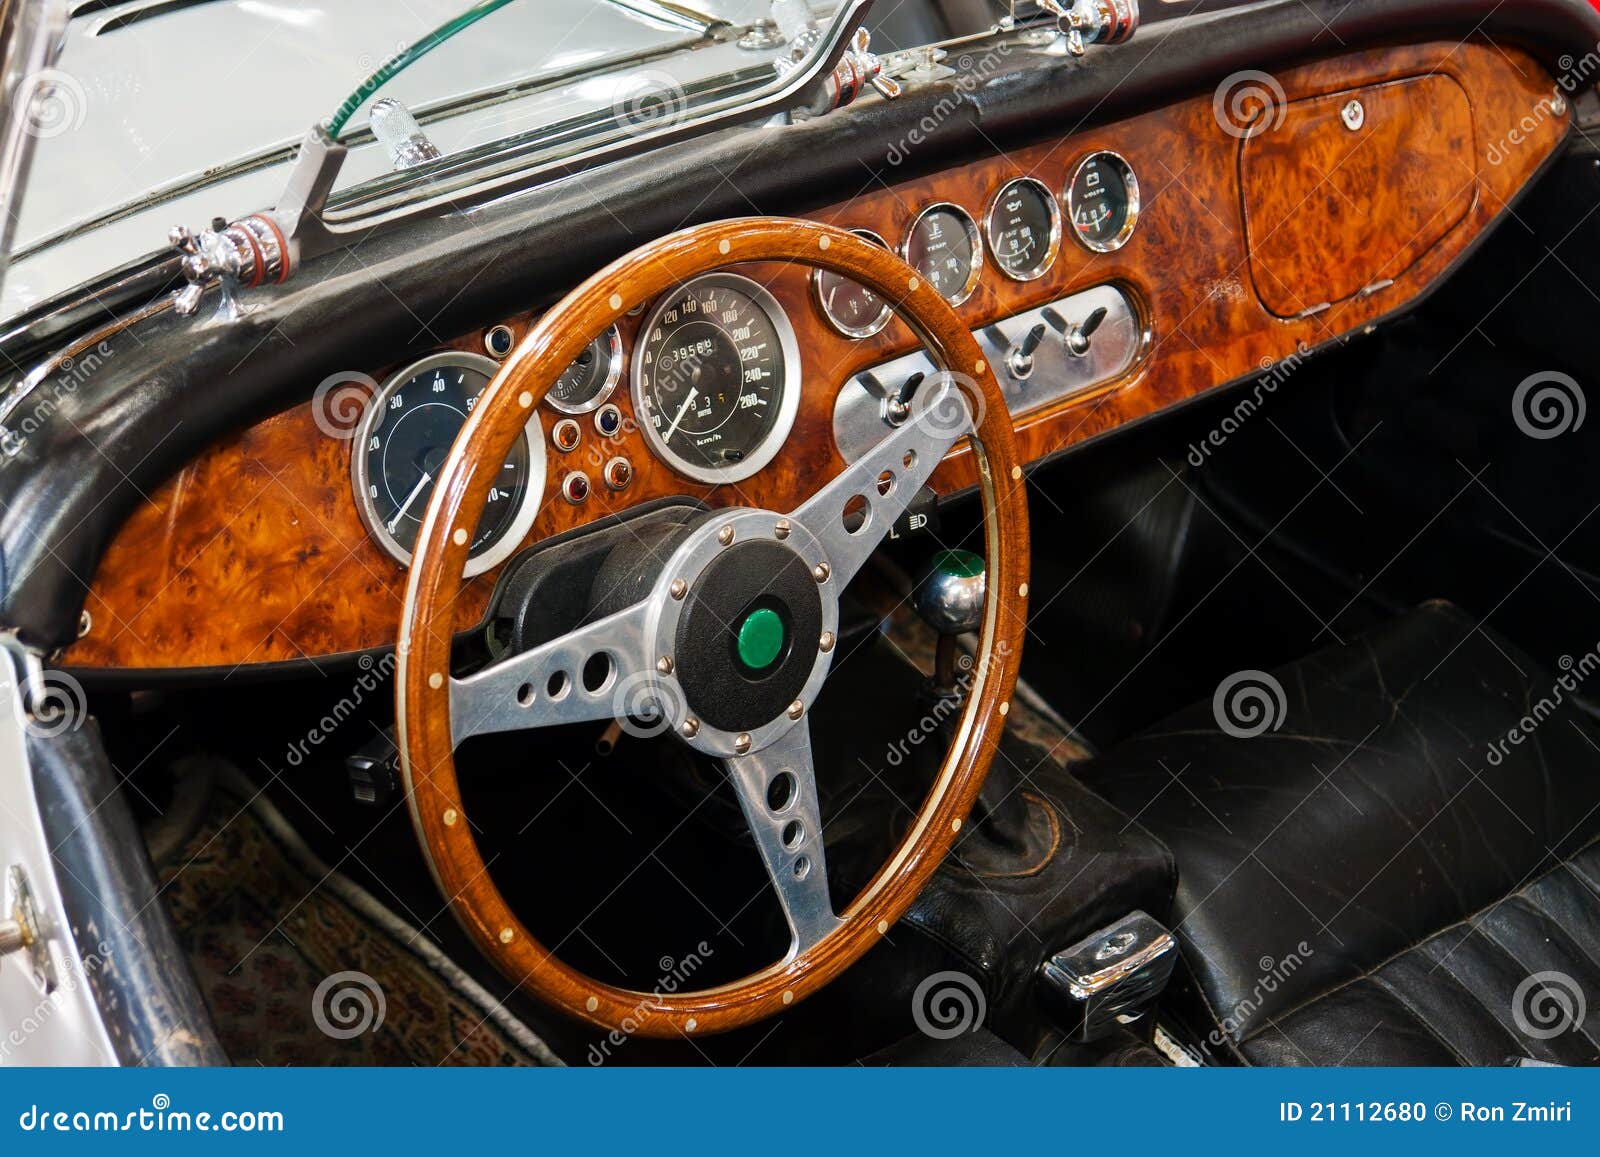 Interior And Dashboard On A Vintage Sports Car Stock Photo  Image 